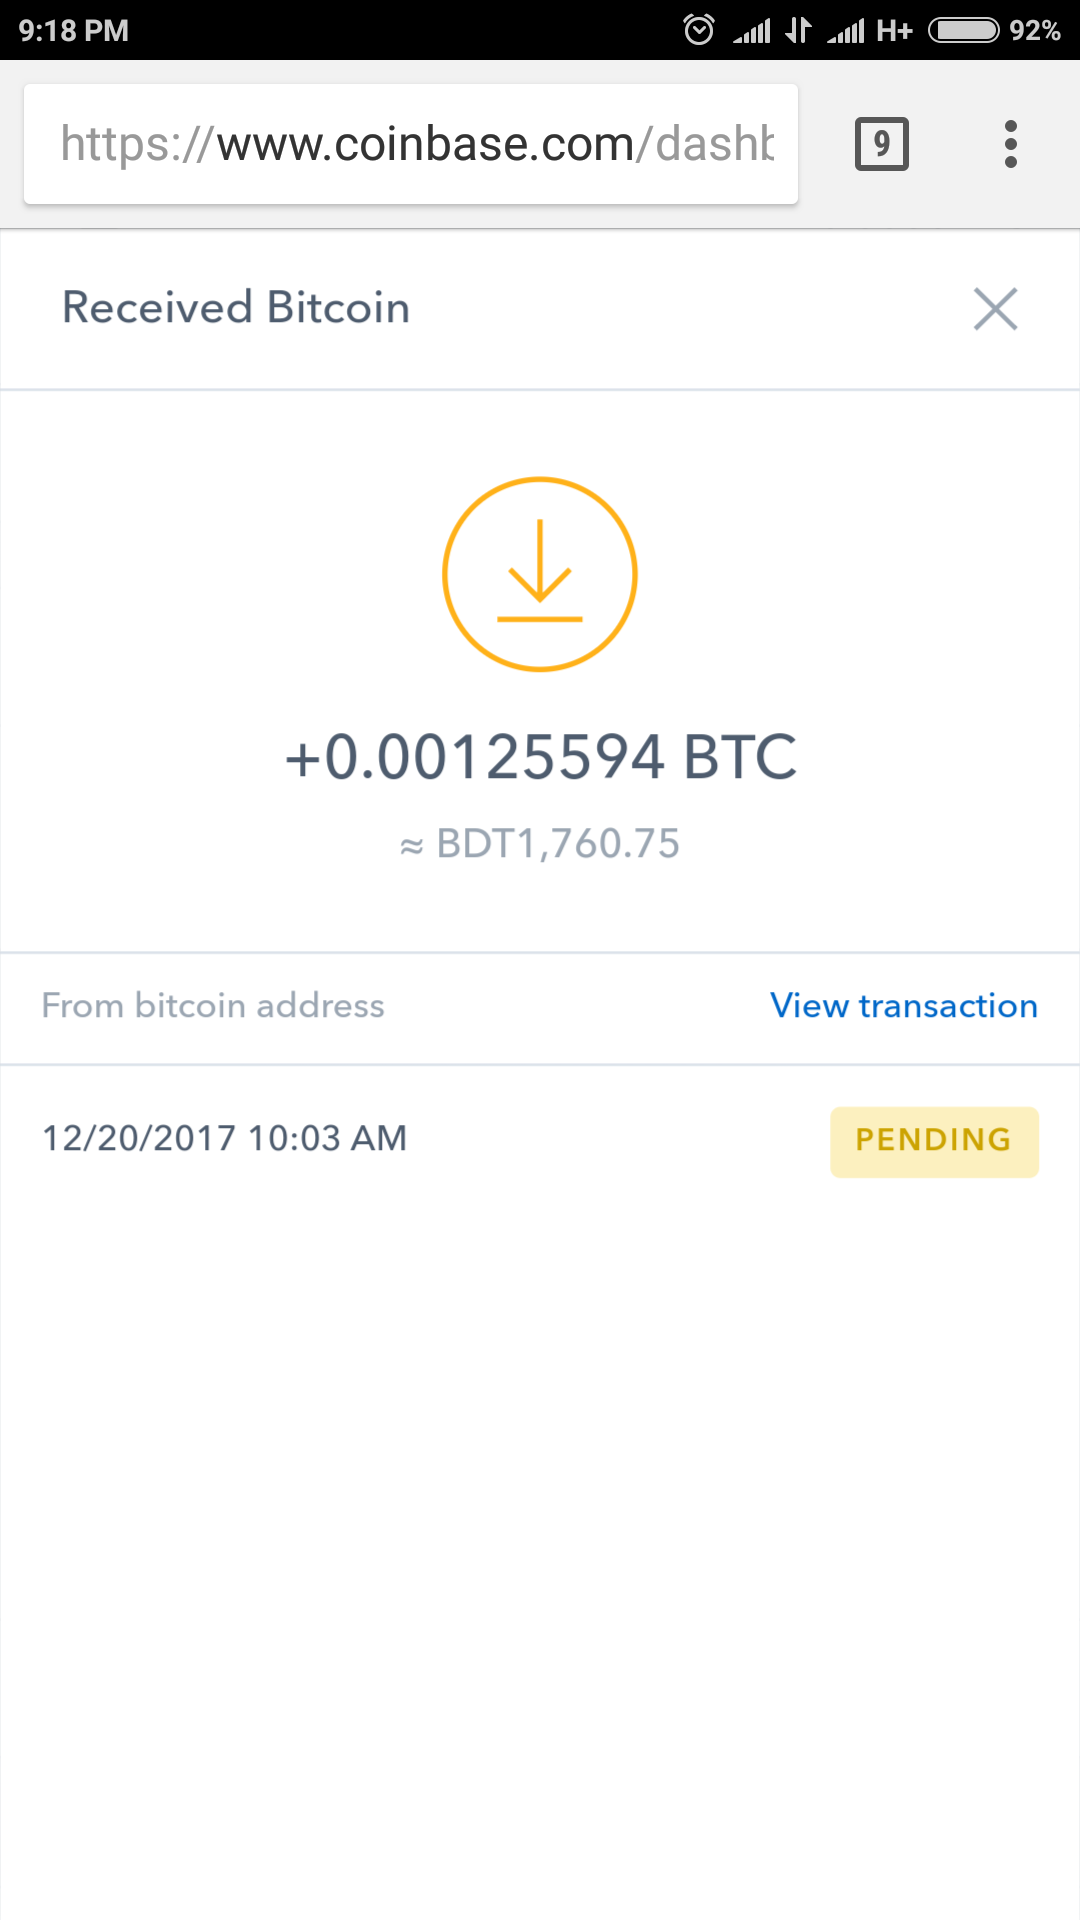 Why my bitcoin transaction is pending